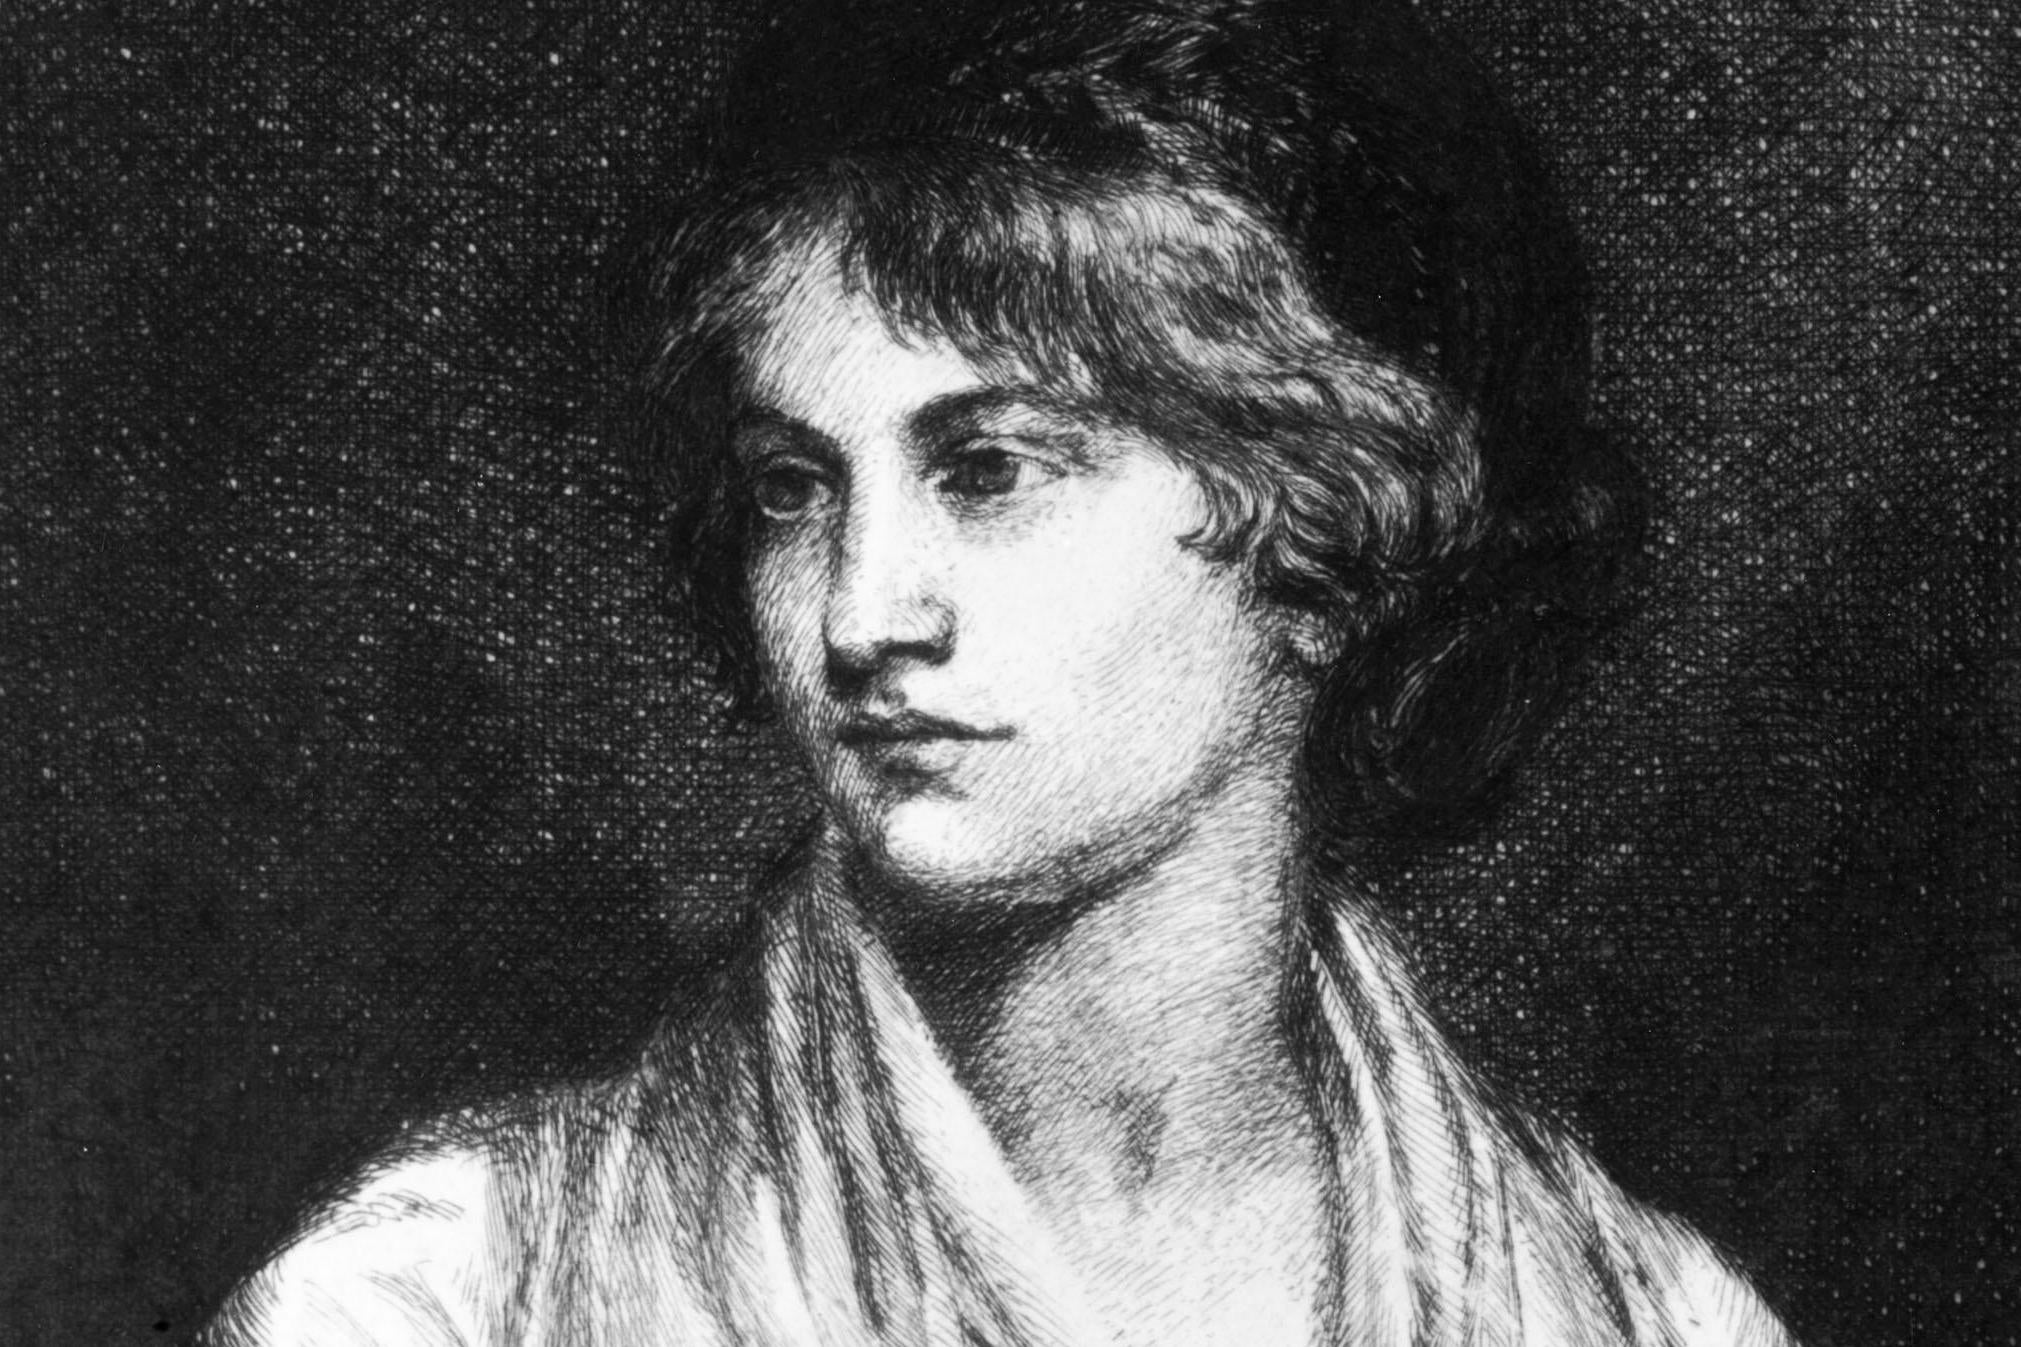 Mary Wollstonecraft lands a spot on Time’s ‘Most-read female writers in college classes’ roundup